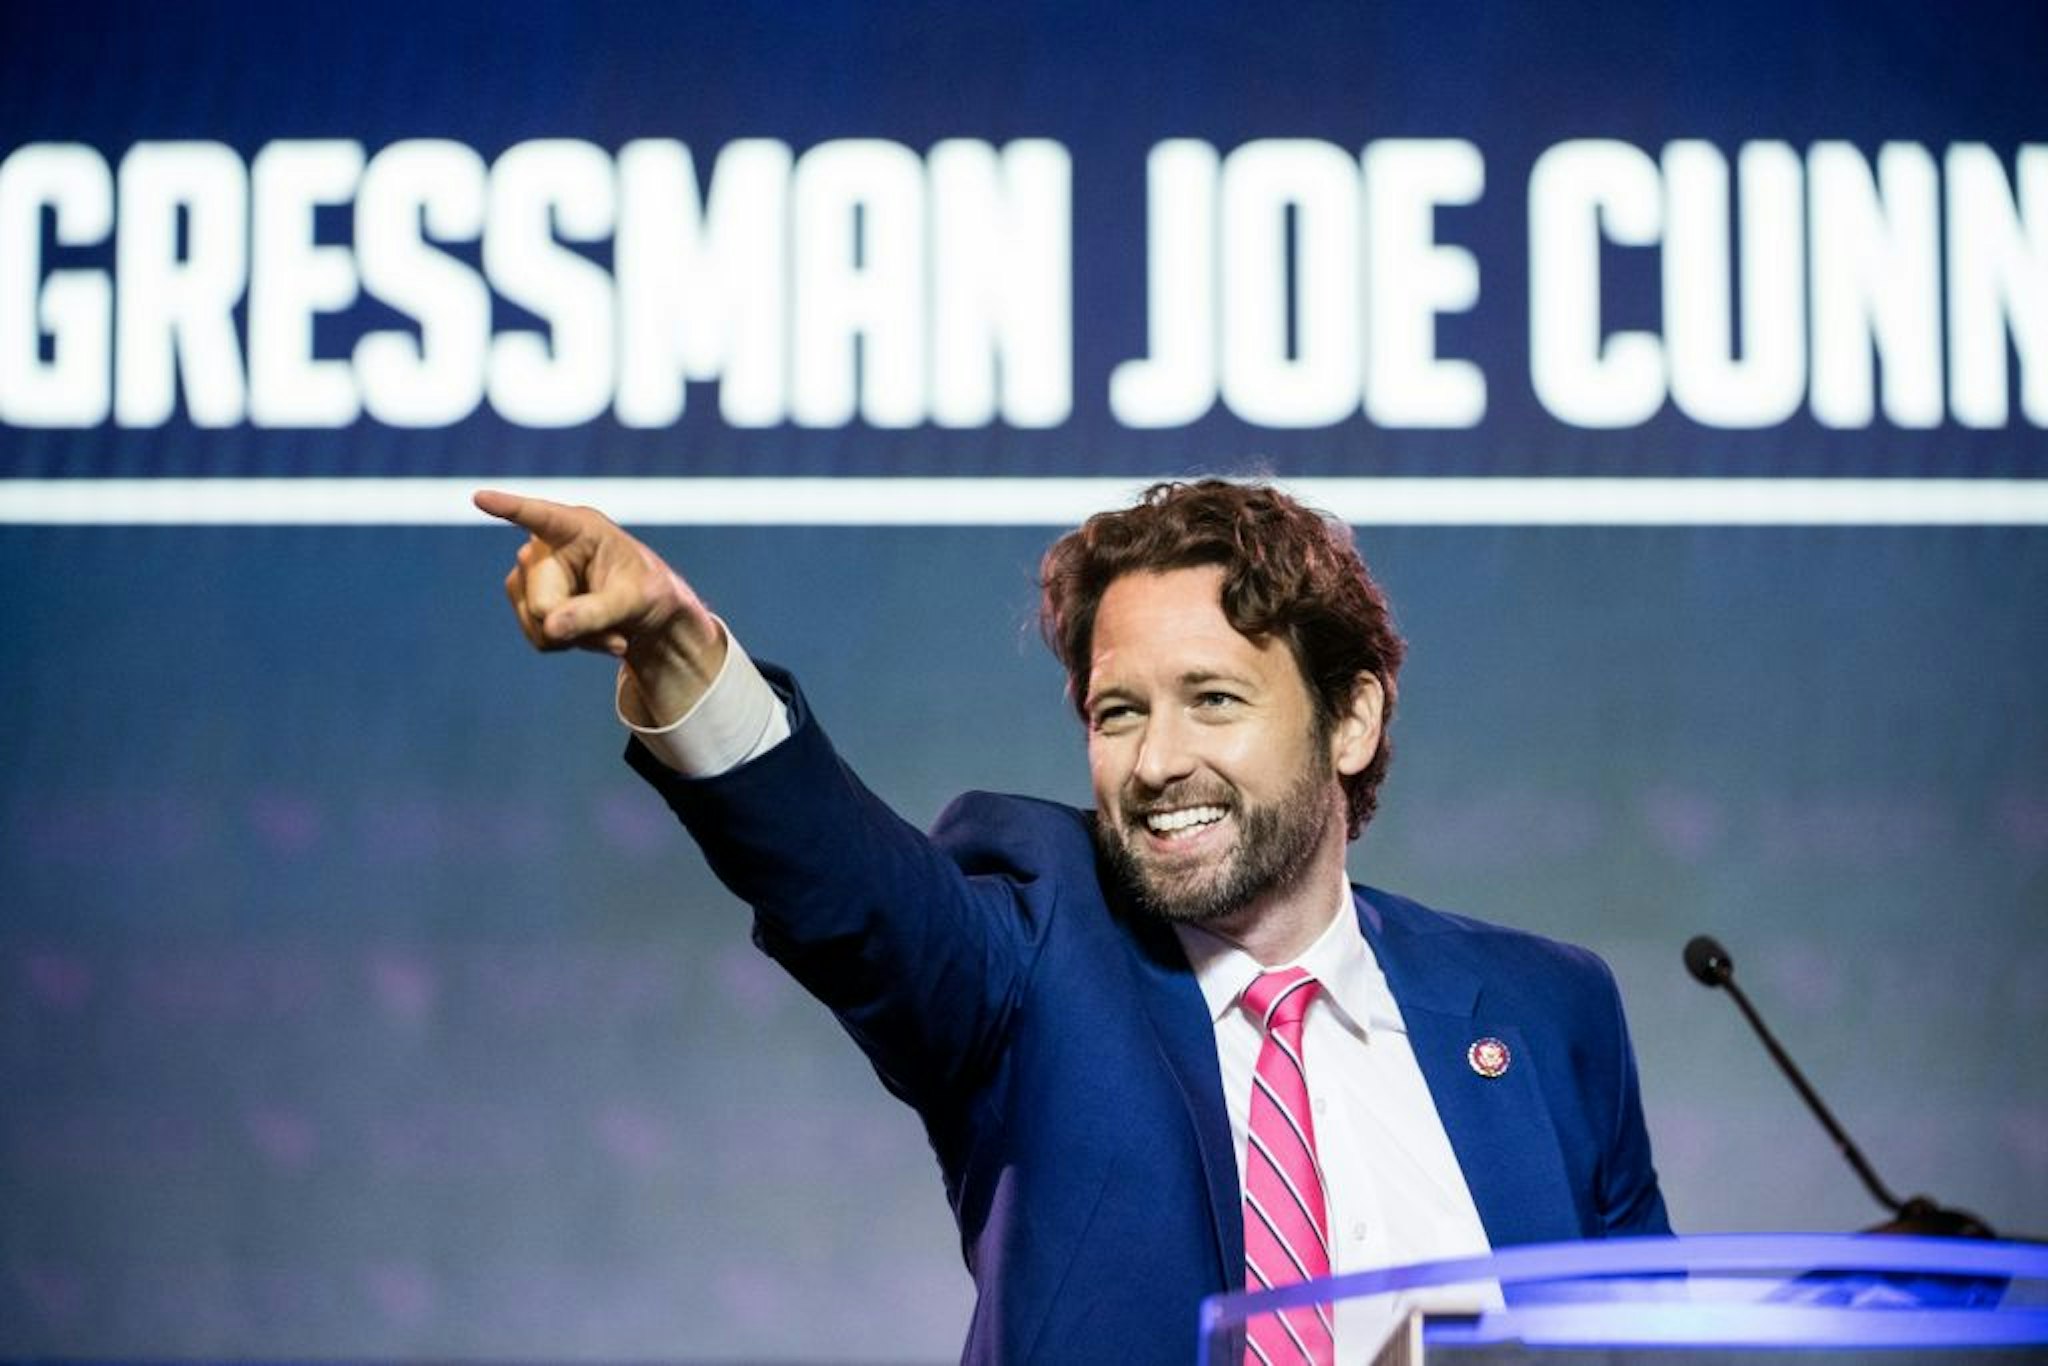 Rep. Joe Cunningham (D-SC) addresses the crowd at the 2019 South Carolina Democratic Party State Convention on June 22, 2019 in Columbia, South Carolina.